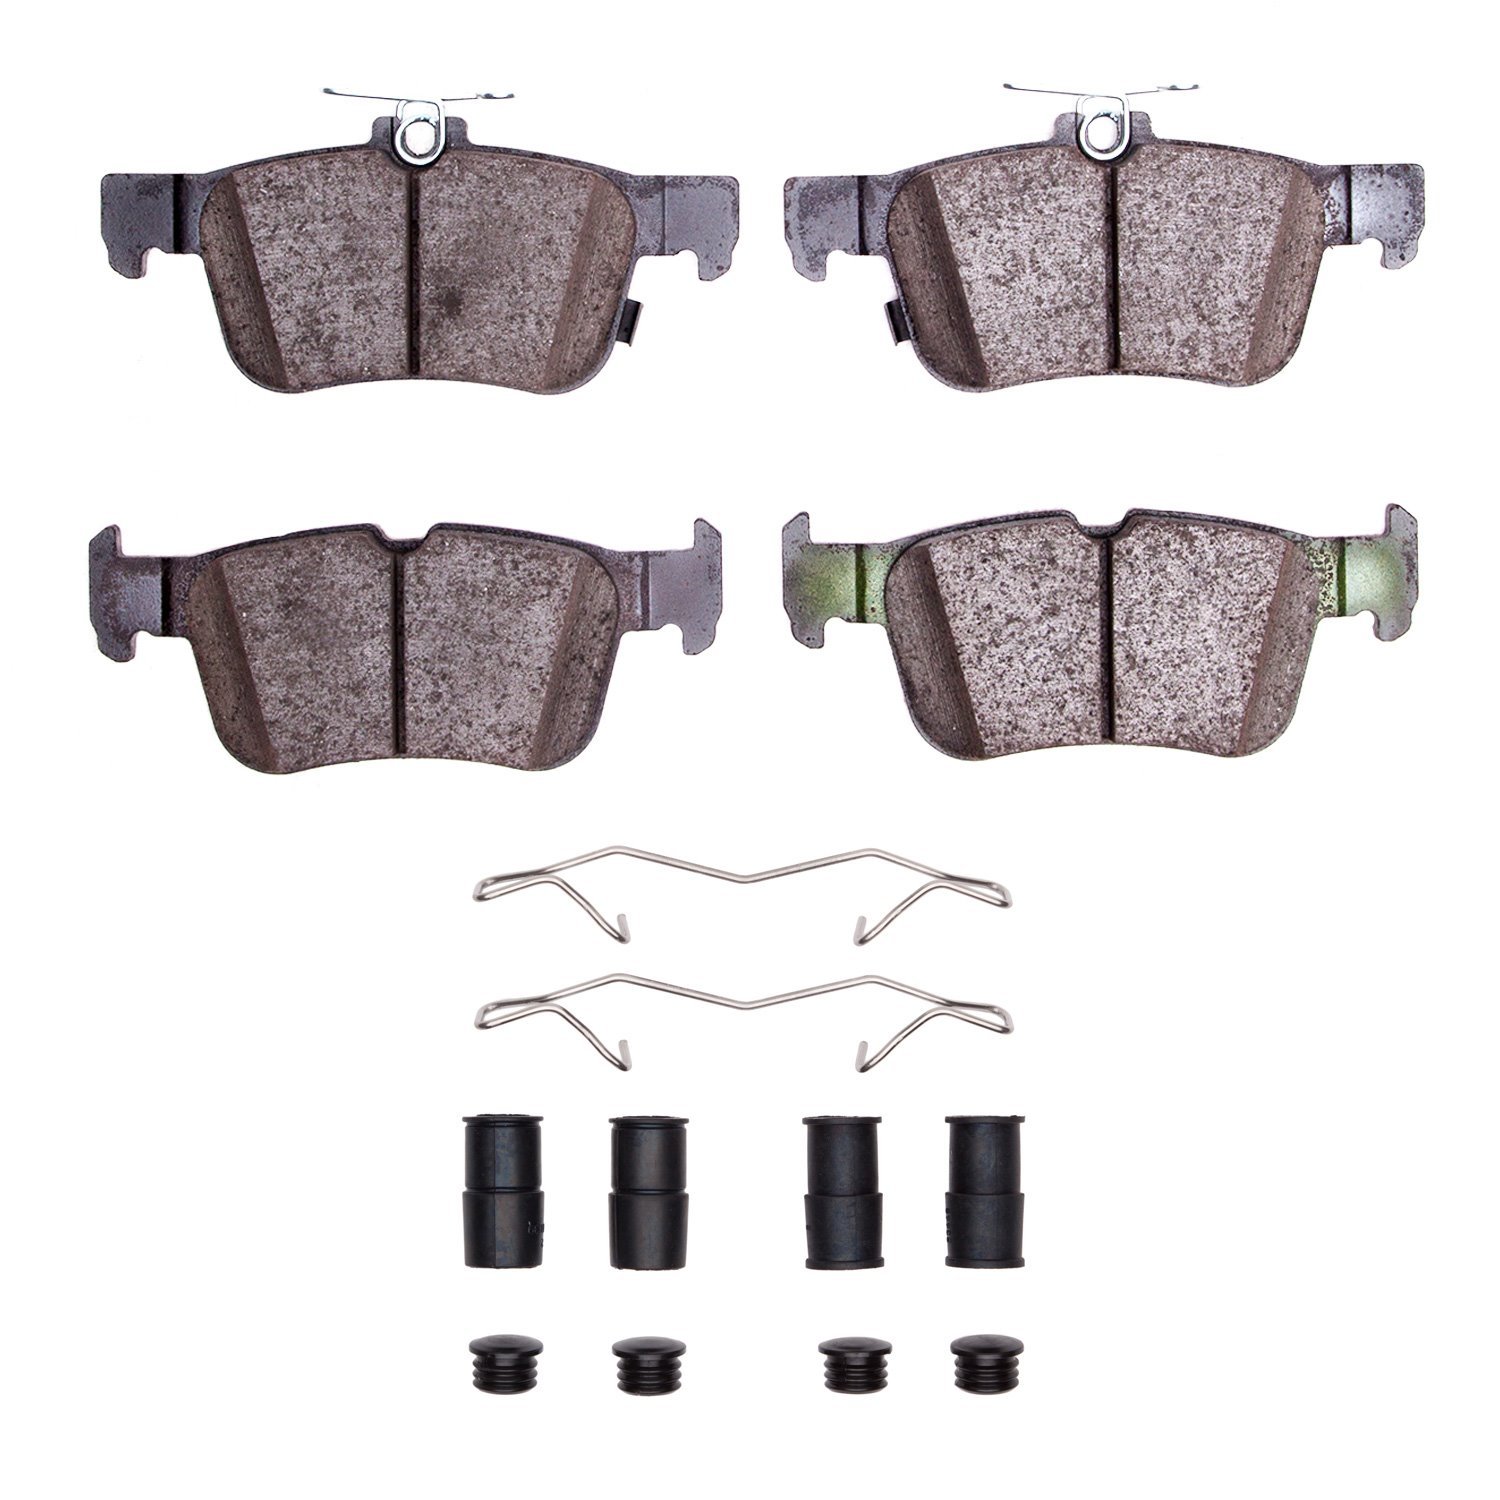 1310-1665-01 3000-Series Ceramic Brake Pads & Hardware Kit, Fits Select Ford/Lincoln/Mercury/Mazda, Position: Rear